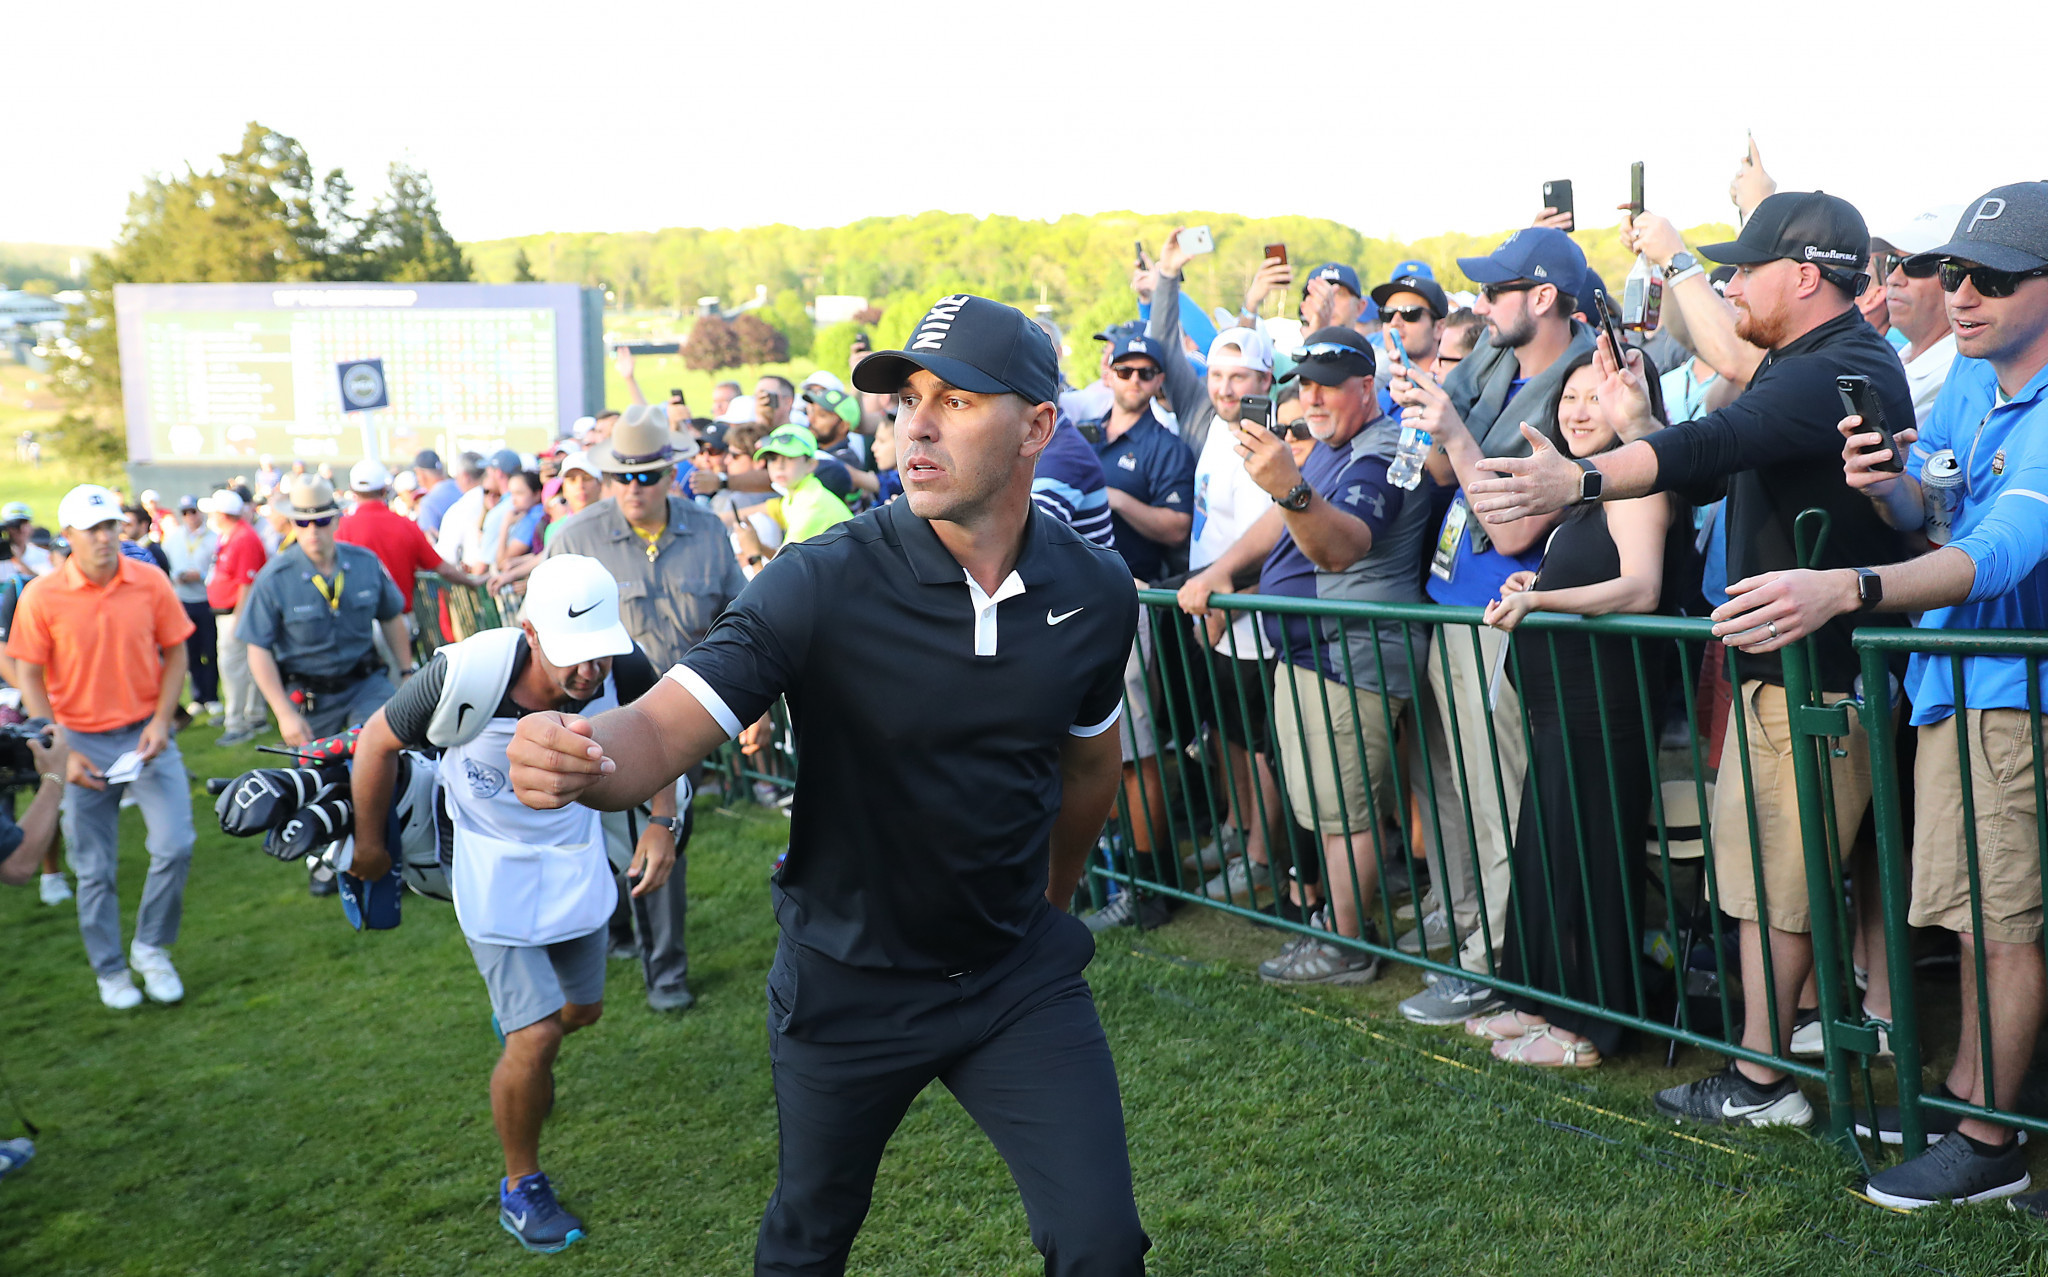 Koepka closes in on US PGA Championship title after maintaining huge lead